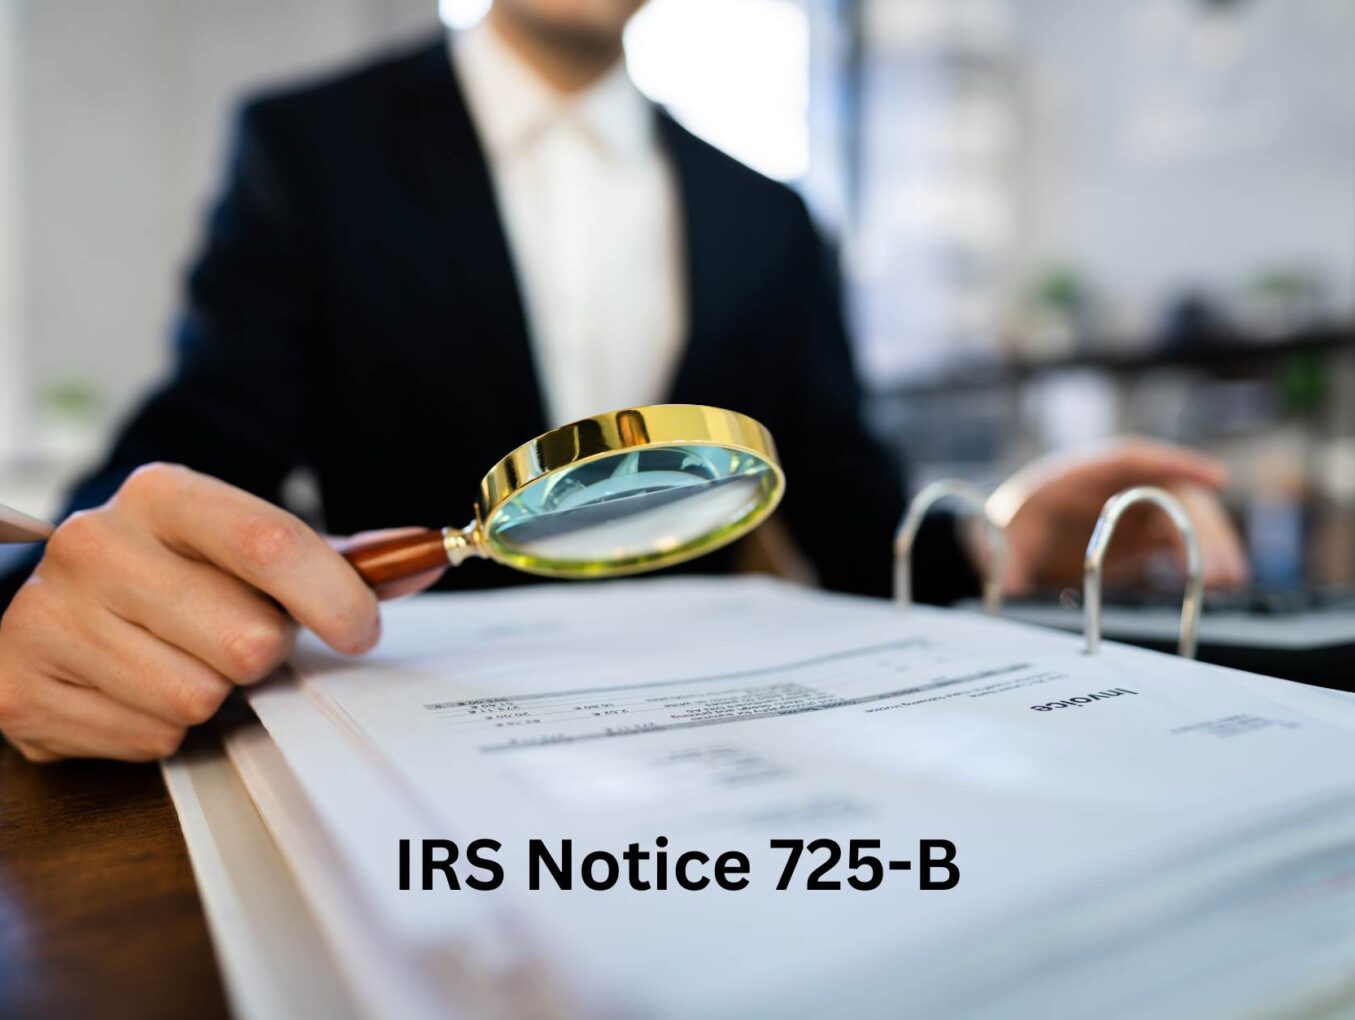 IRS Letter 725-B: Revenue Officer Meeting Notification